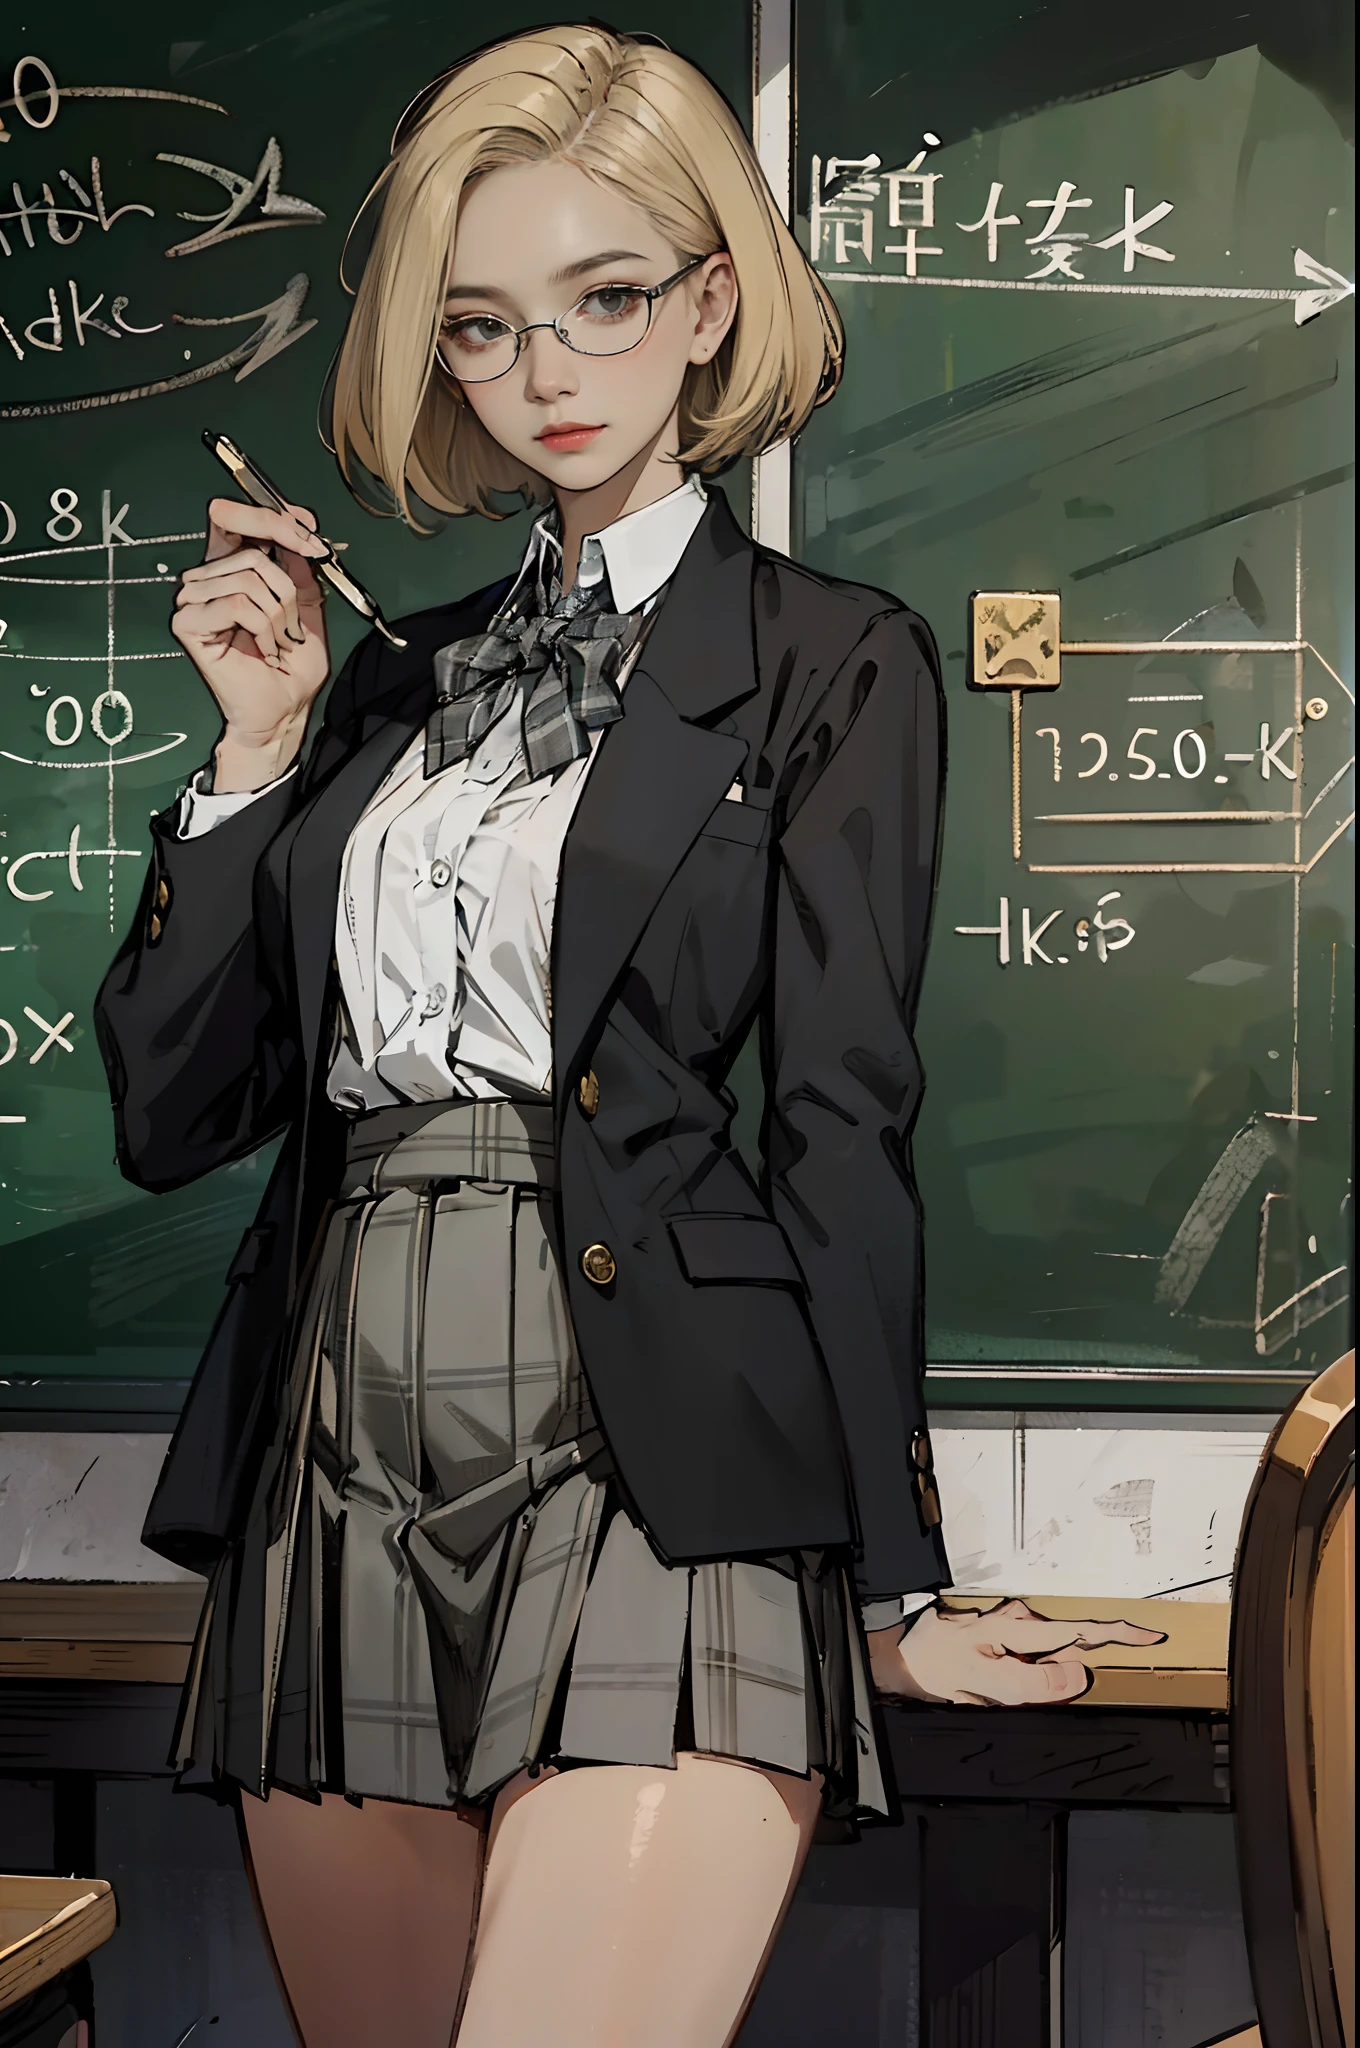 (8K, RAW photo, High sensitivity, Best quality, Extremely detailed hair, Masterpiece, Ultra-high resolution, Photorealistic:1.25) , thin frame glasses, frontage, 1girll, The profession is a teacher，Uniforms, Dark gray open jacket, Dark gray blazer, Pleated skirt, Plaid skirts, Gray-brown hair, Gold-tone round glasses, at class room, There was a blackboard behind him，There are mathematical formulas on the blackboard，Detailed portrayal